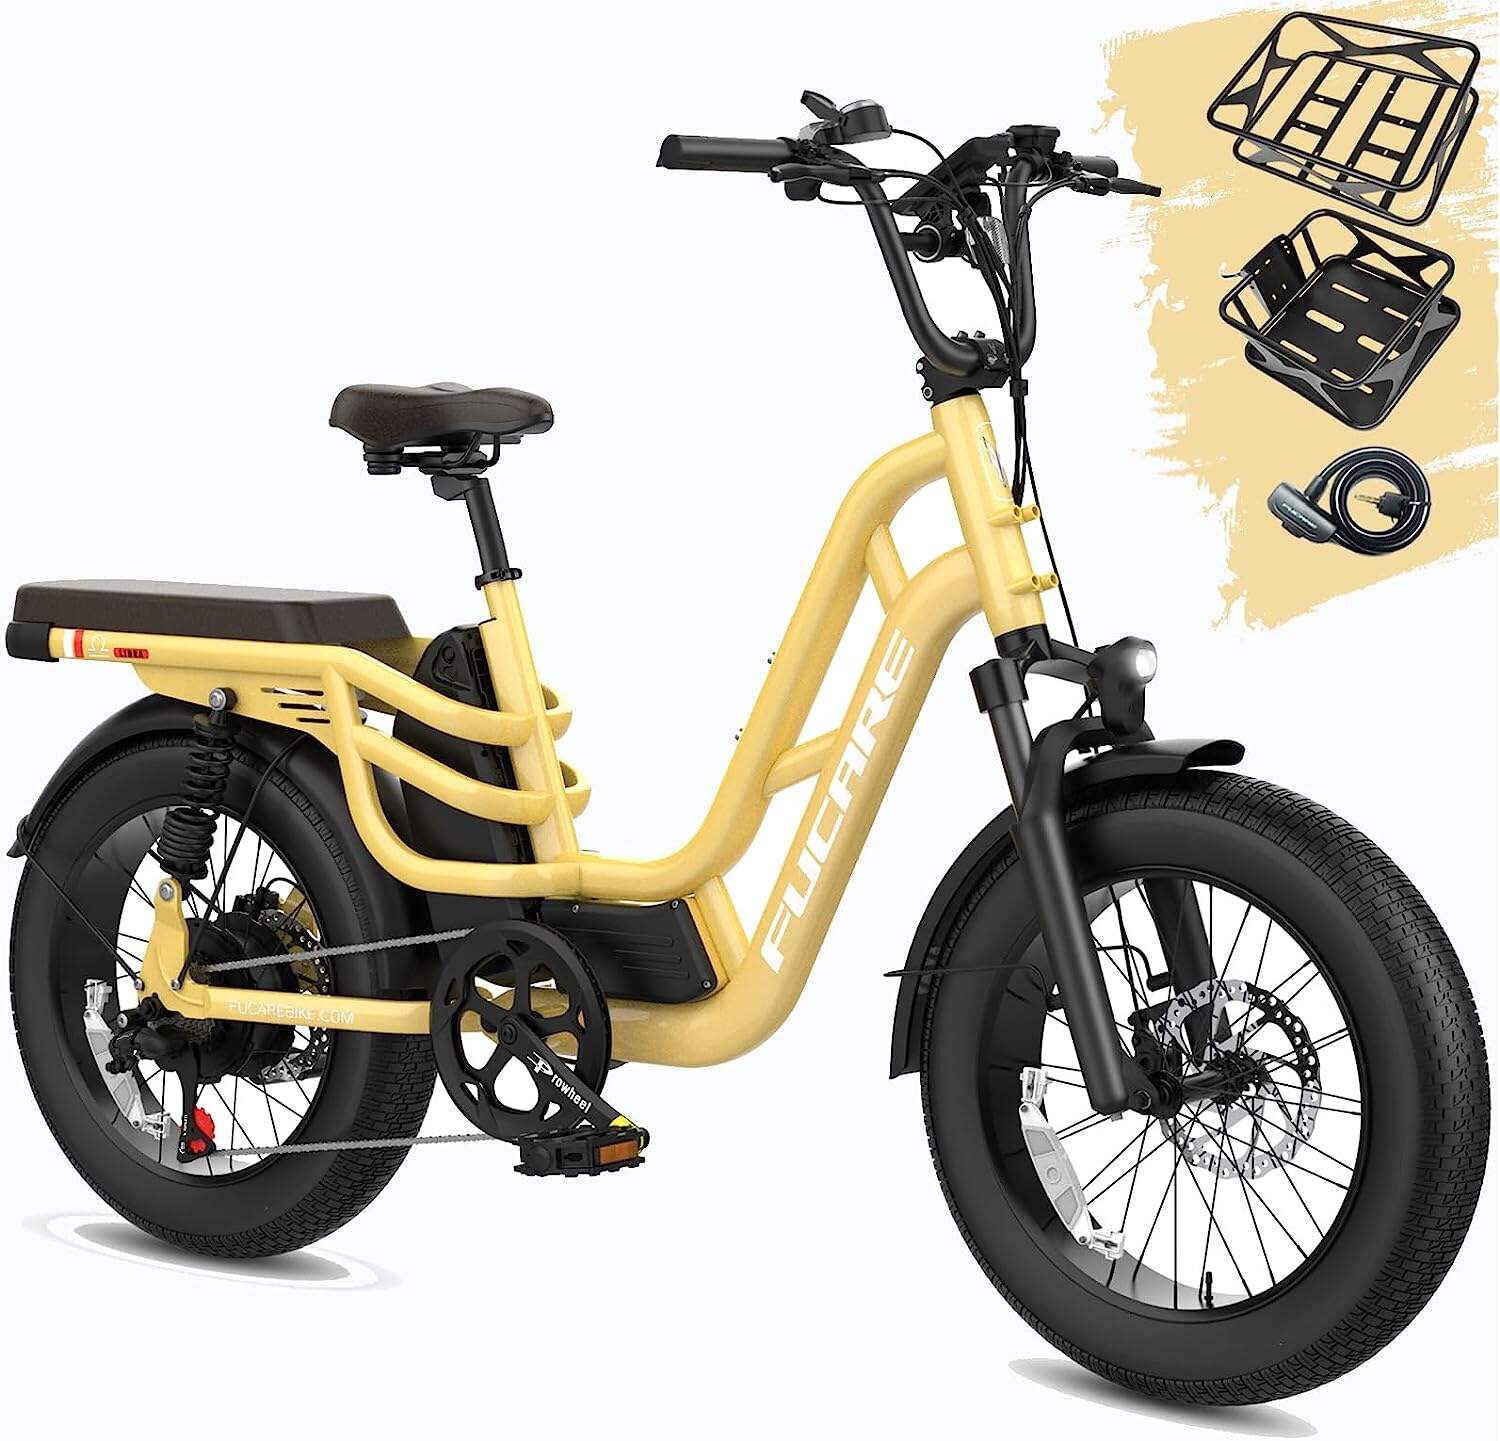 Fucare Libra 750W Electric Bike for Adults 32MPH 48V 20Ah LG Lithium Battery EBike with Full Suspension LCD Color Display 20*4.0 All-Terrain Fat Tire Shimano 7 Speed Snow Commute Electric Bicycles...